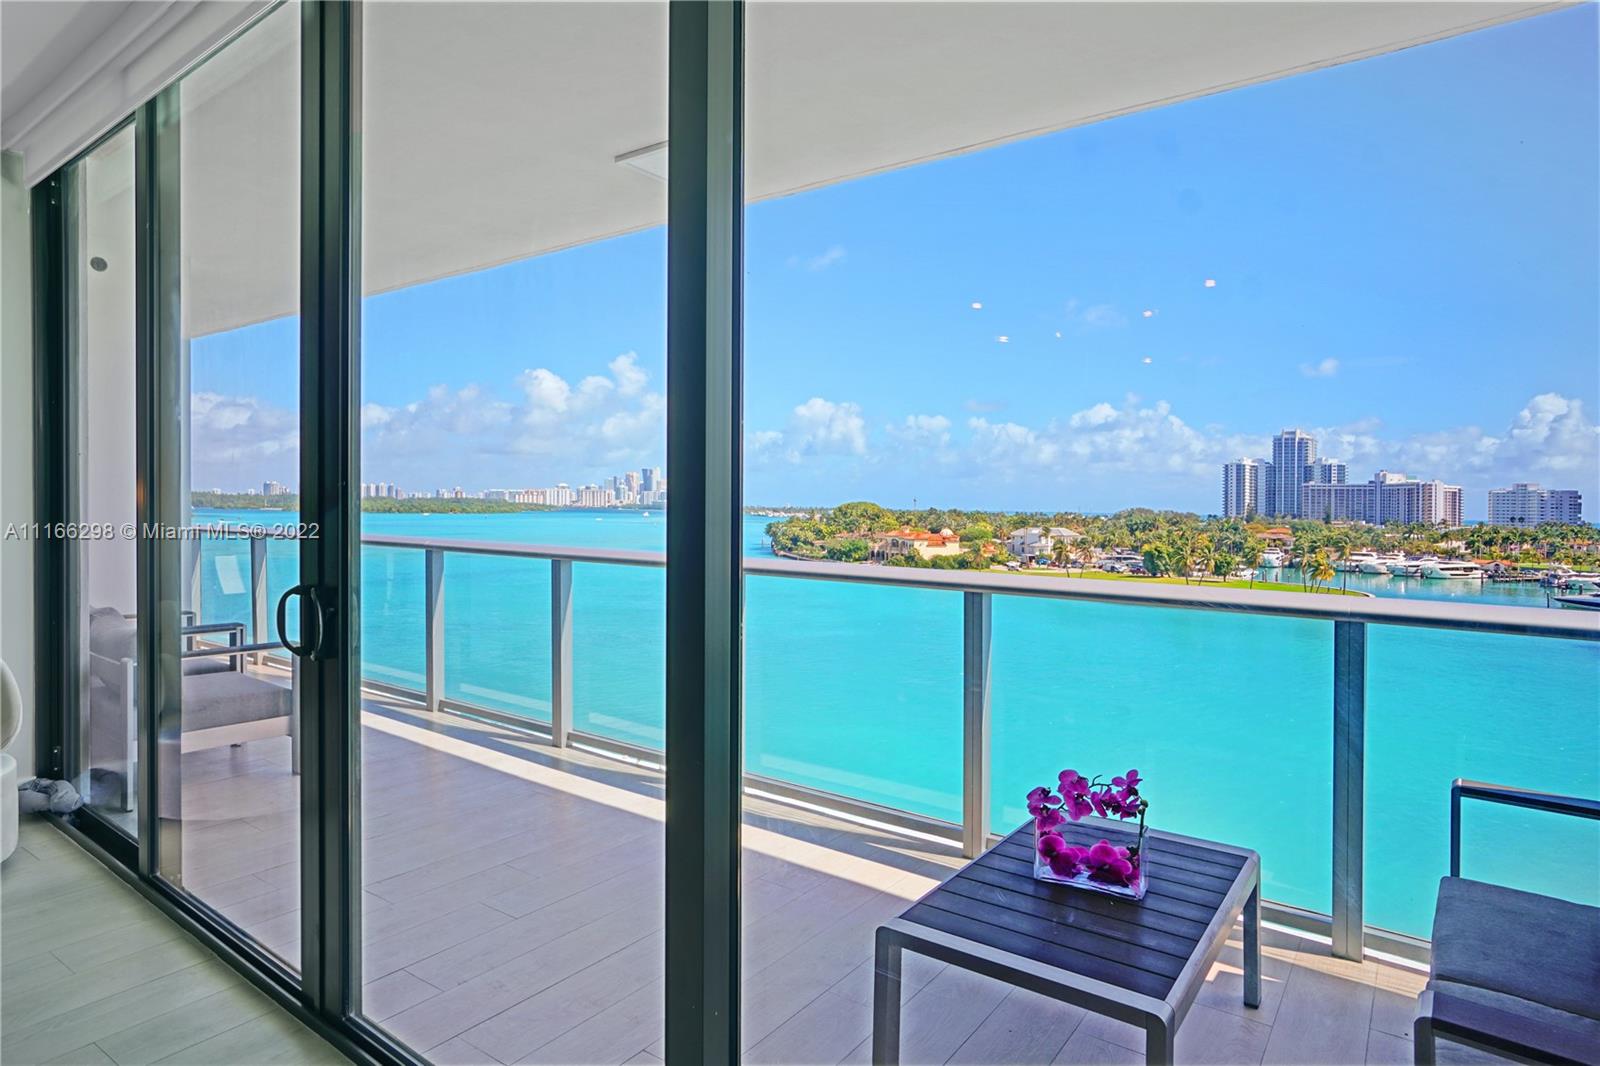 RARE TO FIND – Live in the spectacular boutique building SERENO RESIDENCES, corner unit and waterfront views | *** Click on Virtual Tour Link ***| 4 BDR | 3 FULL Bath + ½ Bath | 1 Boat Slip Max 45” | 2 Assigned Parking | 1 Extra Storage | Elevator | exclusive BBQ Area| Pool |Kayaks | GYM | Bay Harbour Islands is a BEAUTIFUL hidden gem tucked behind Surfside and Bal Harbor Village, that is undergoing a major redevelopment | Known worldwide for family atmosphere | Steps away (around 0.6 mile) to sandy beaches, famous Bal Harbor Shops, Restaurants, House of Worship, Post Office, supermarket, excellent “A+” public school & + | Yearly rentals allowed immediately | NO SHORT TERMS.